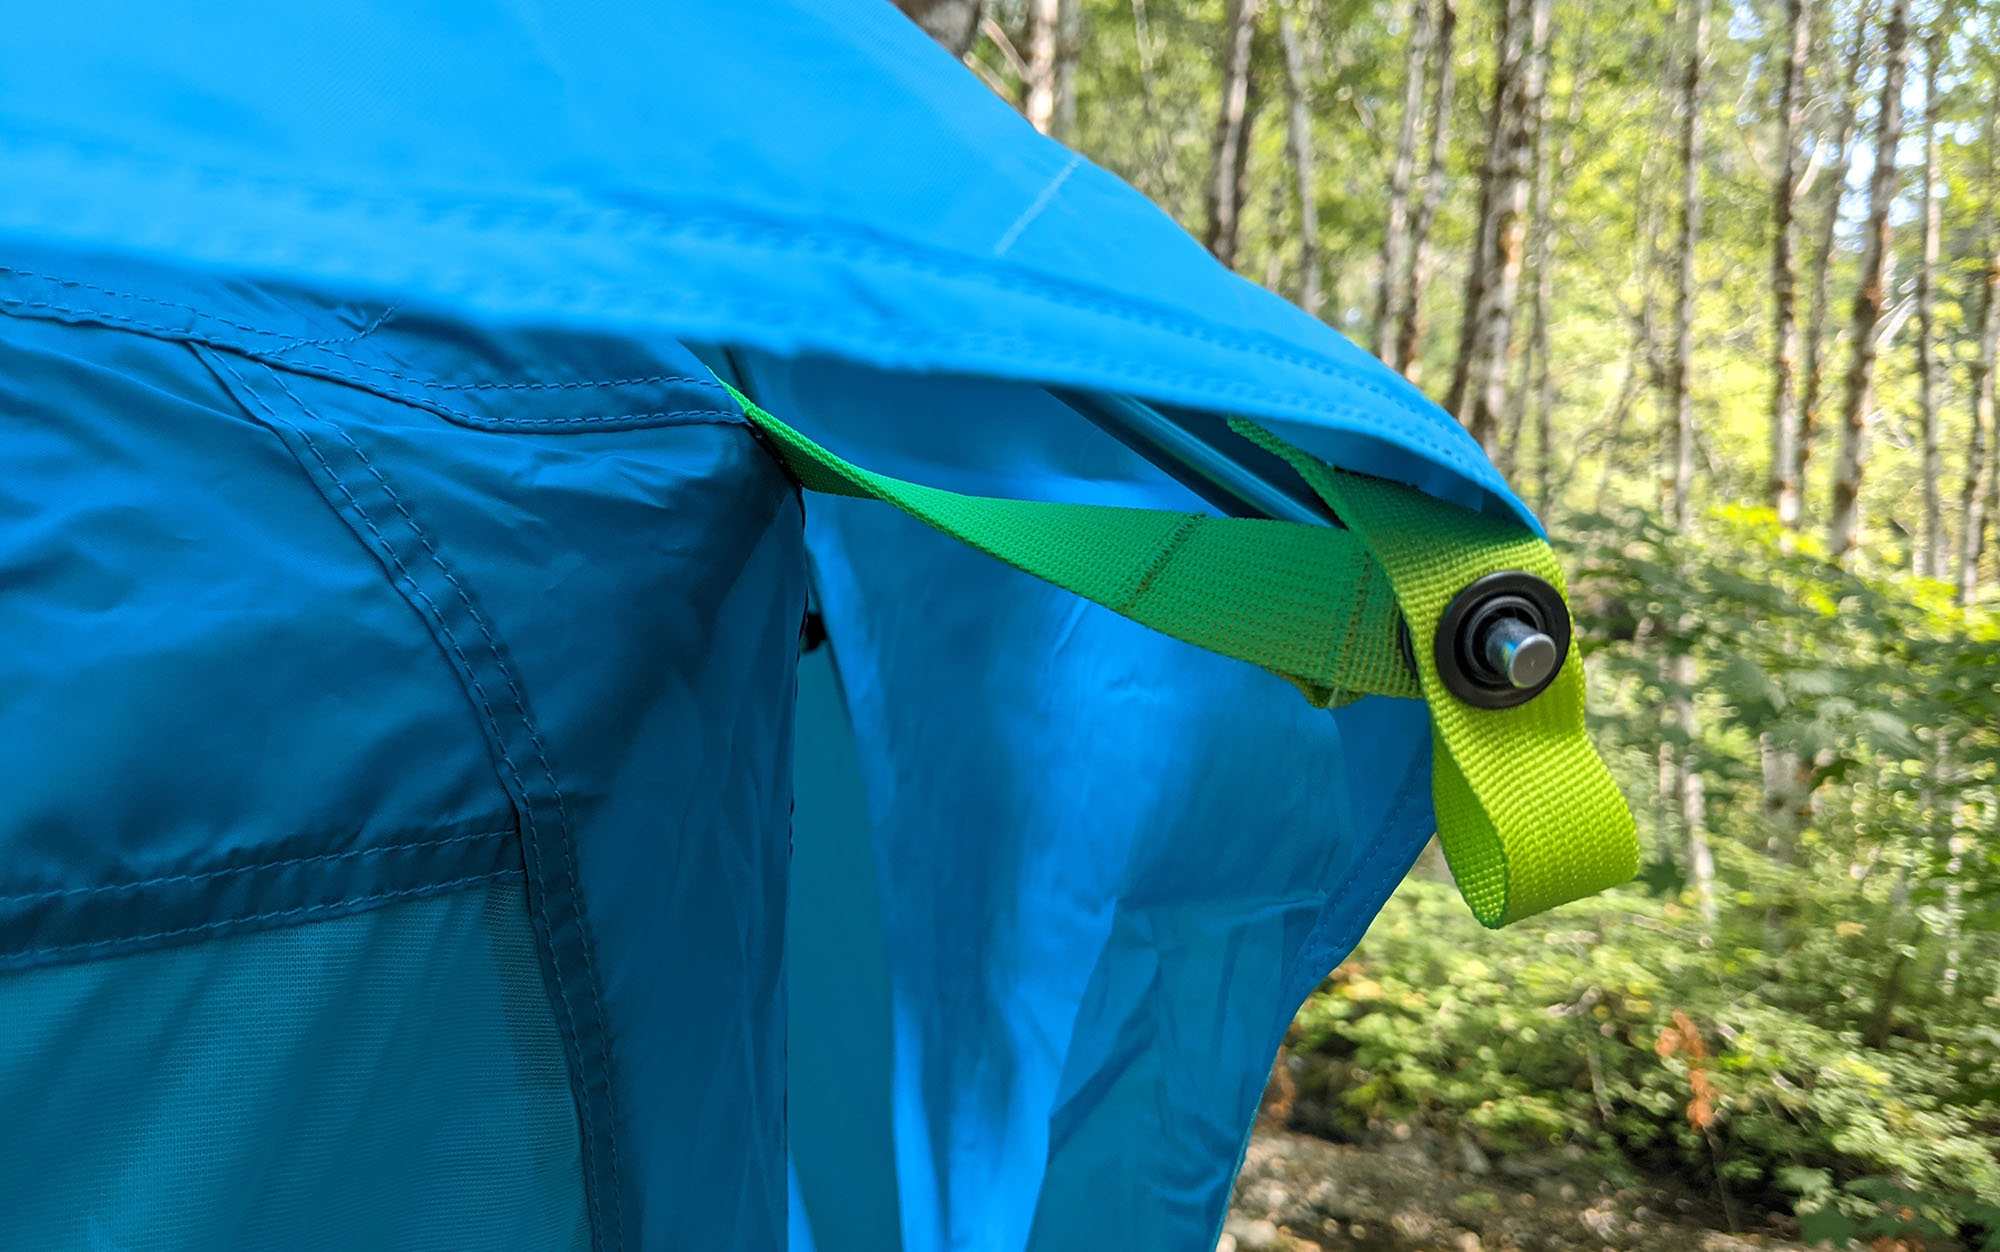 The rainfly for the NEMO Aurora Highrise 6P tent is held taut by the two lengthwise poles, which helps with protection from the elements even if you can’t properly stake out the rain fly in tough ground.